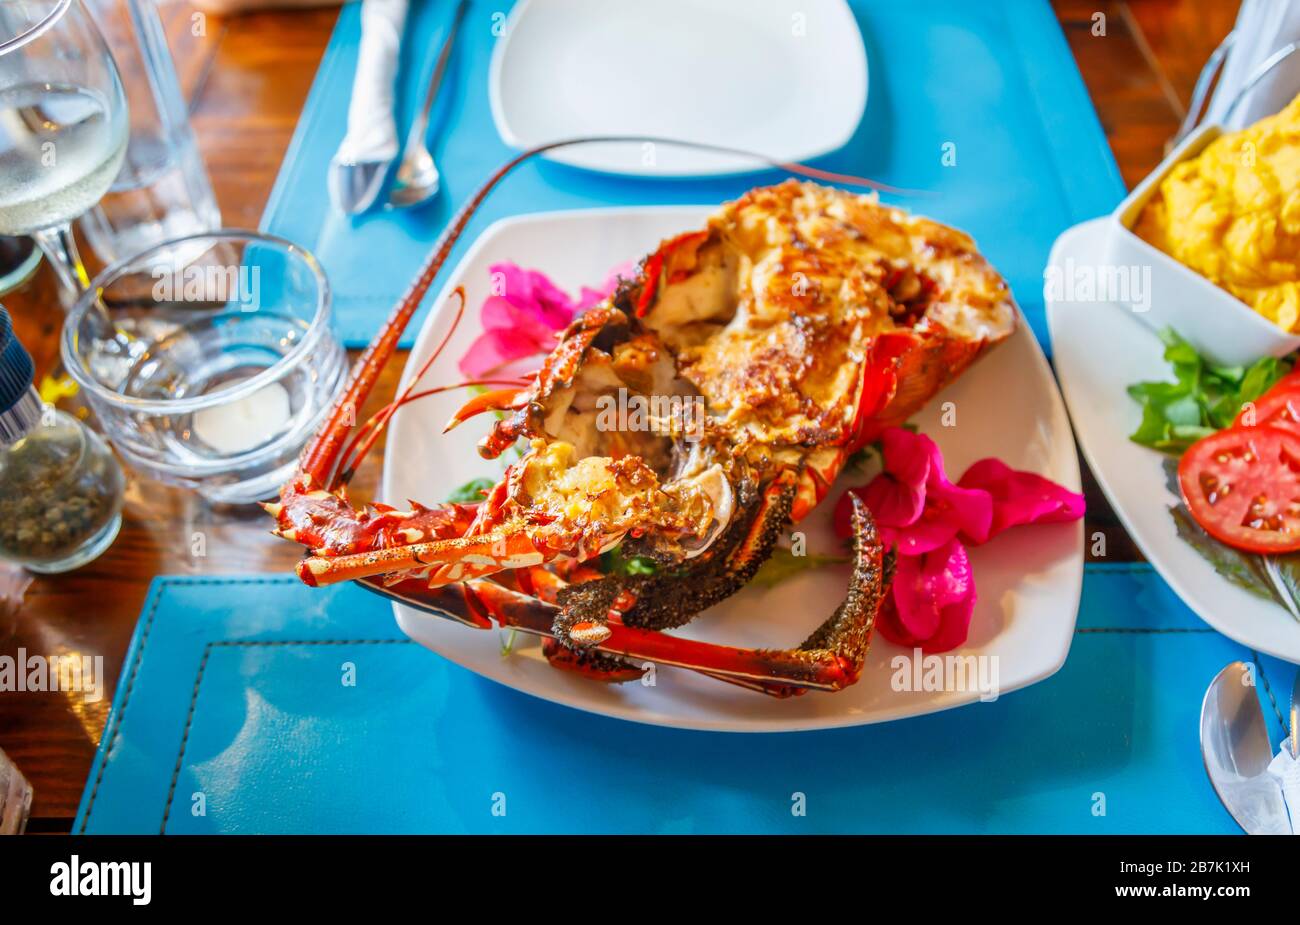 Local delicacy and gourmet speciality, grilled half lobster served on a white plate in a restaurant in Hanga Roa in Easter Island (Rapa Nui), Chile Stock Photo